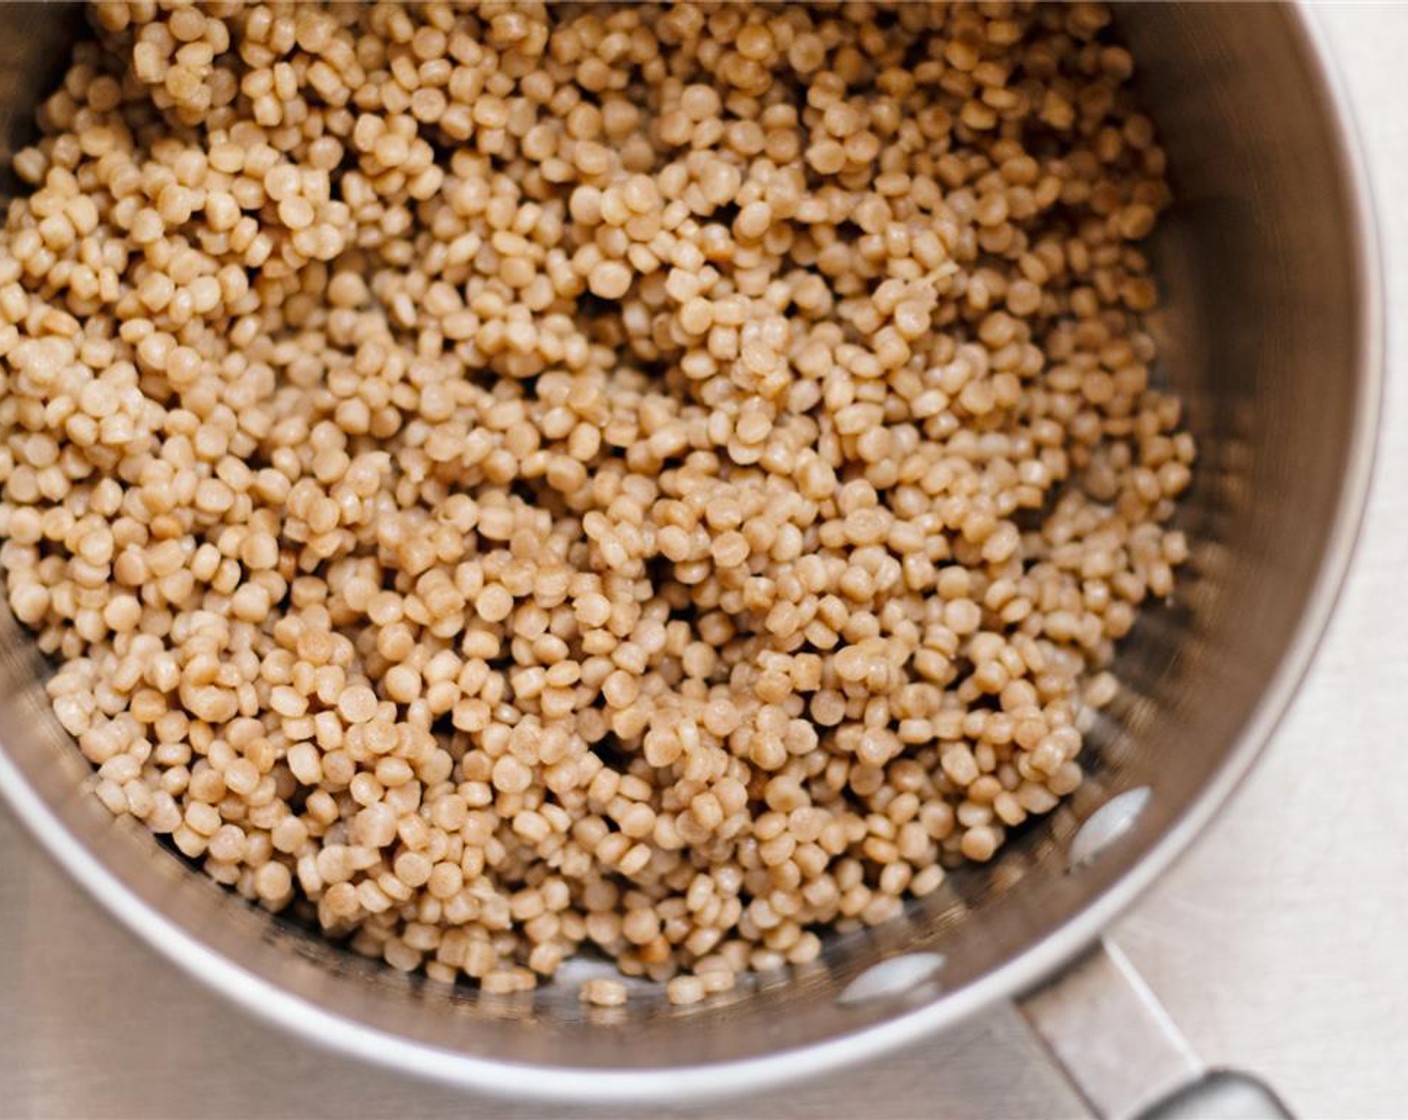 step 1 Prepare the Whole Wheat Israeli Couscous (1 cup) according to the package instructions: bring Water (1 1/2 cups) and Salt (1/2 tsp) to a boil in a medium sauce pot. Add the couscous. Cover and reduce the heat to low, simmering for 10 minutes or until water is absorbed.